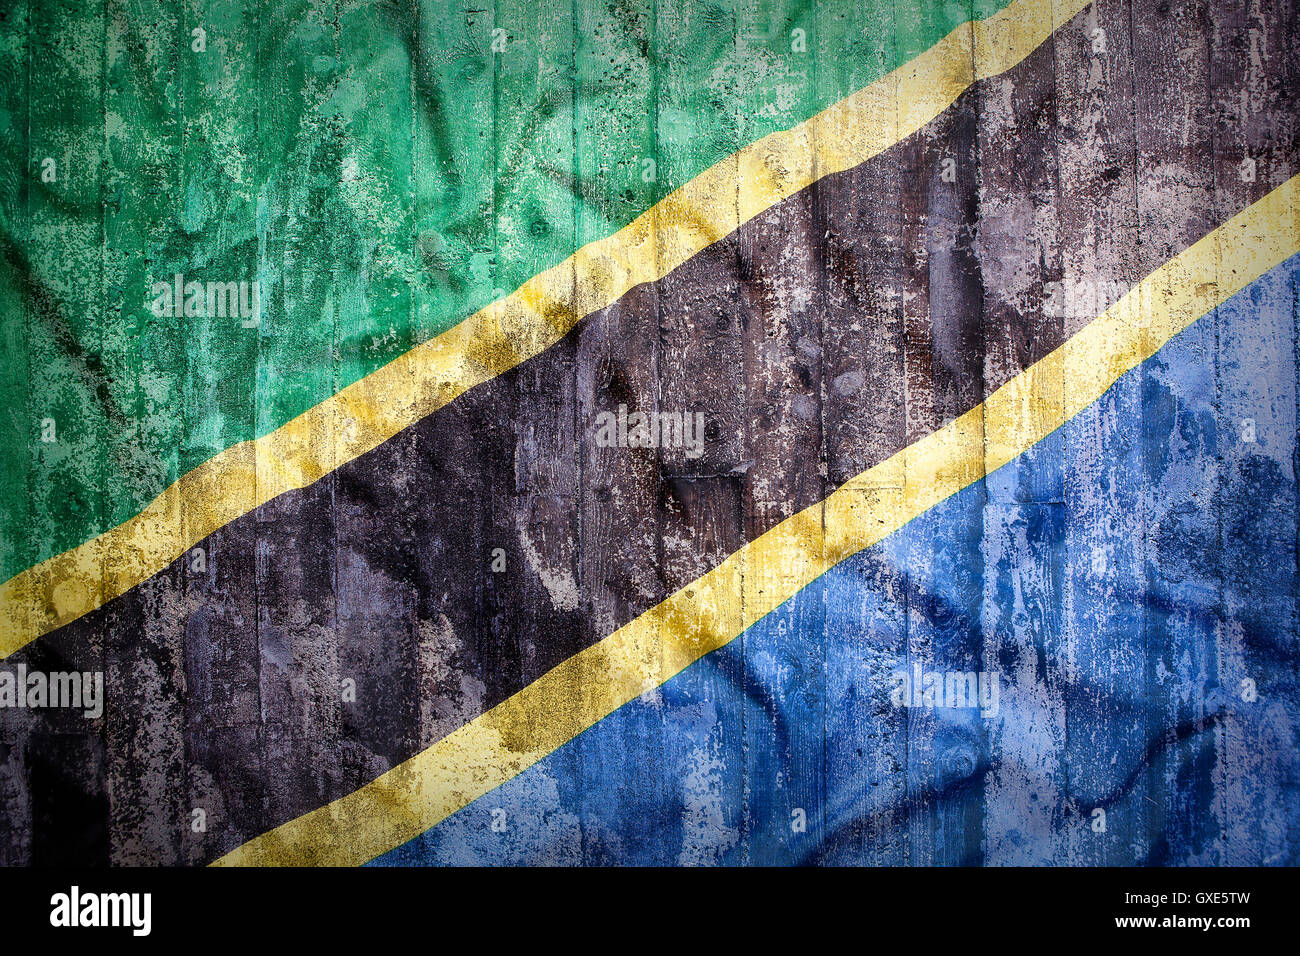 Grunge style of Tanzania flag on a brick wall for background Stock Photo